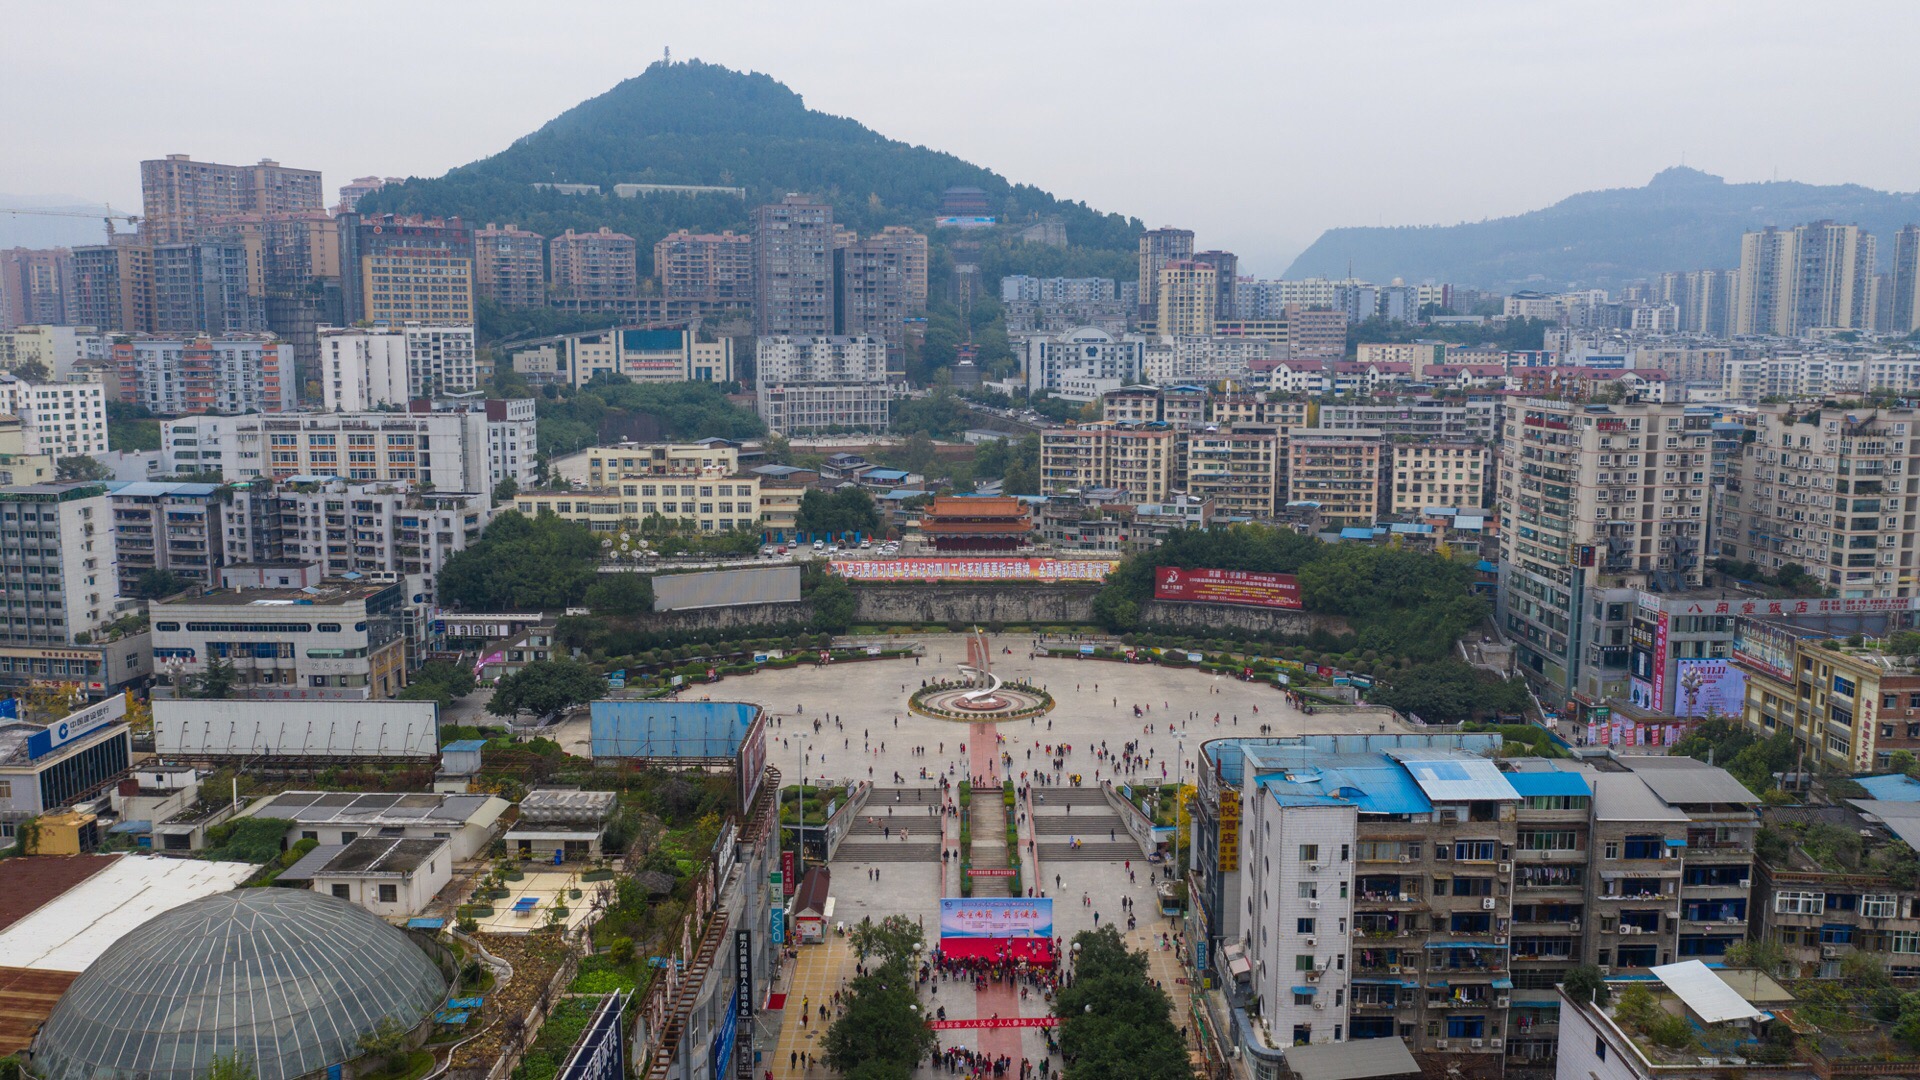 38-facts-about-bazhong